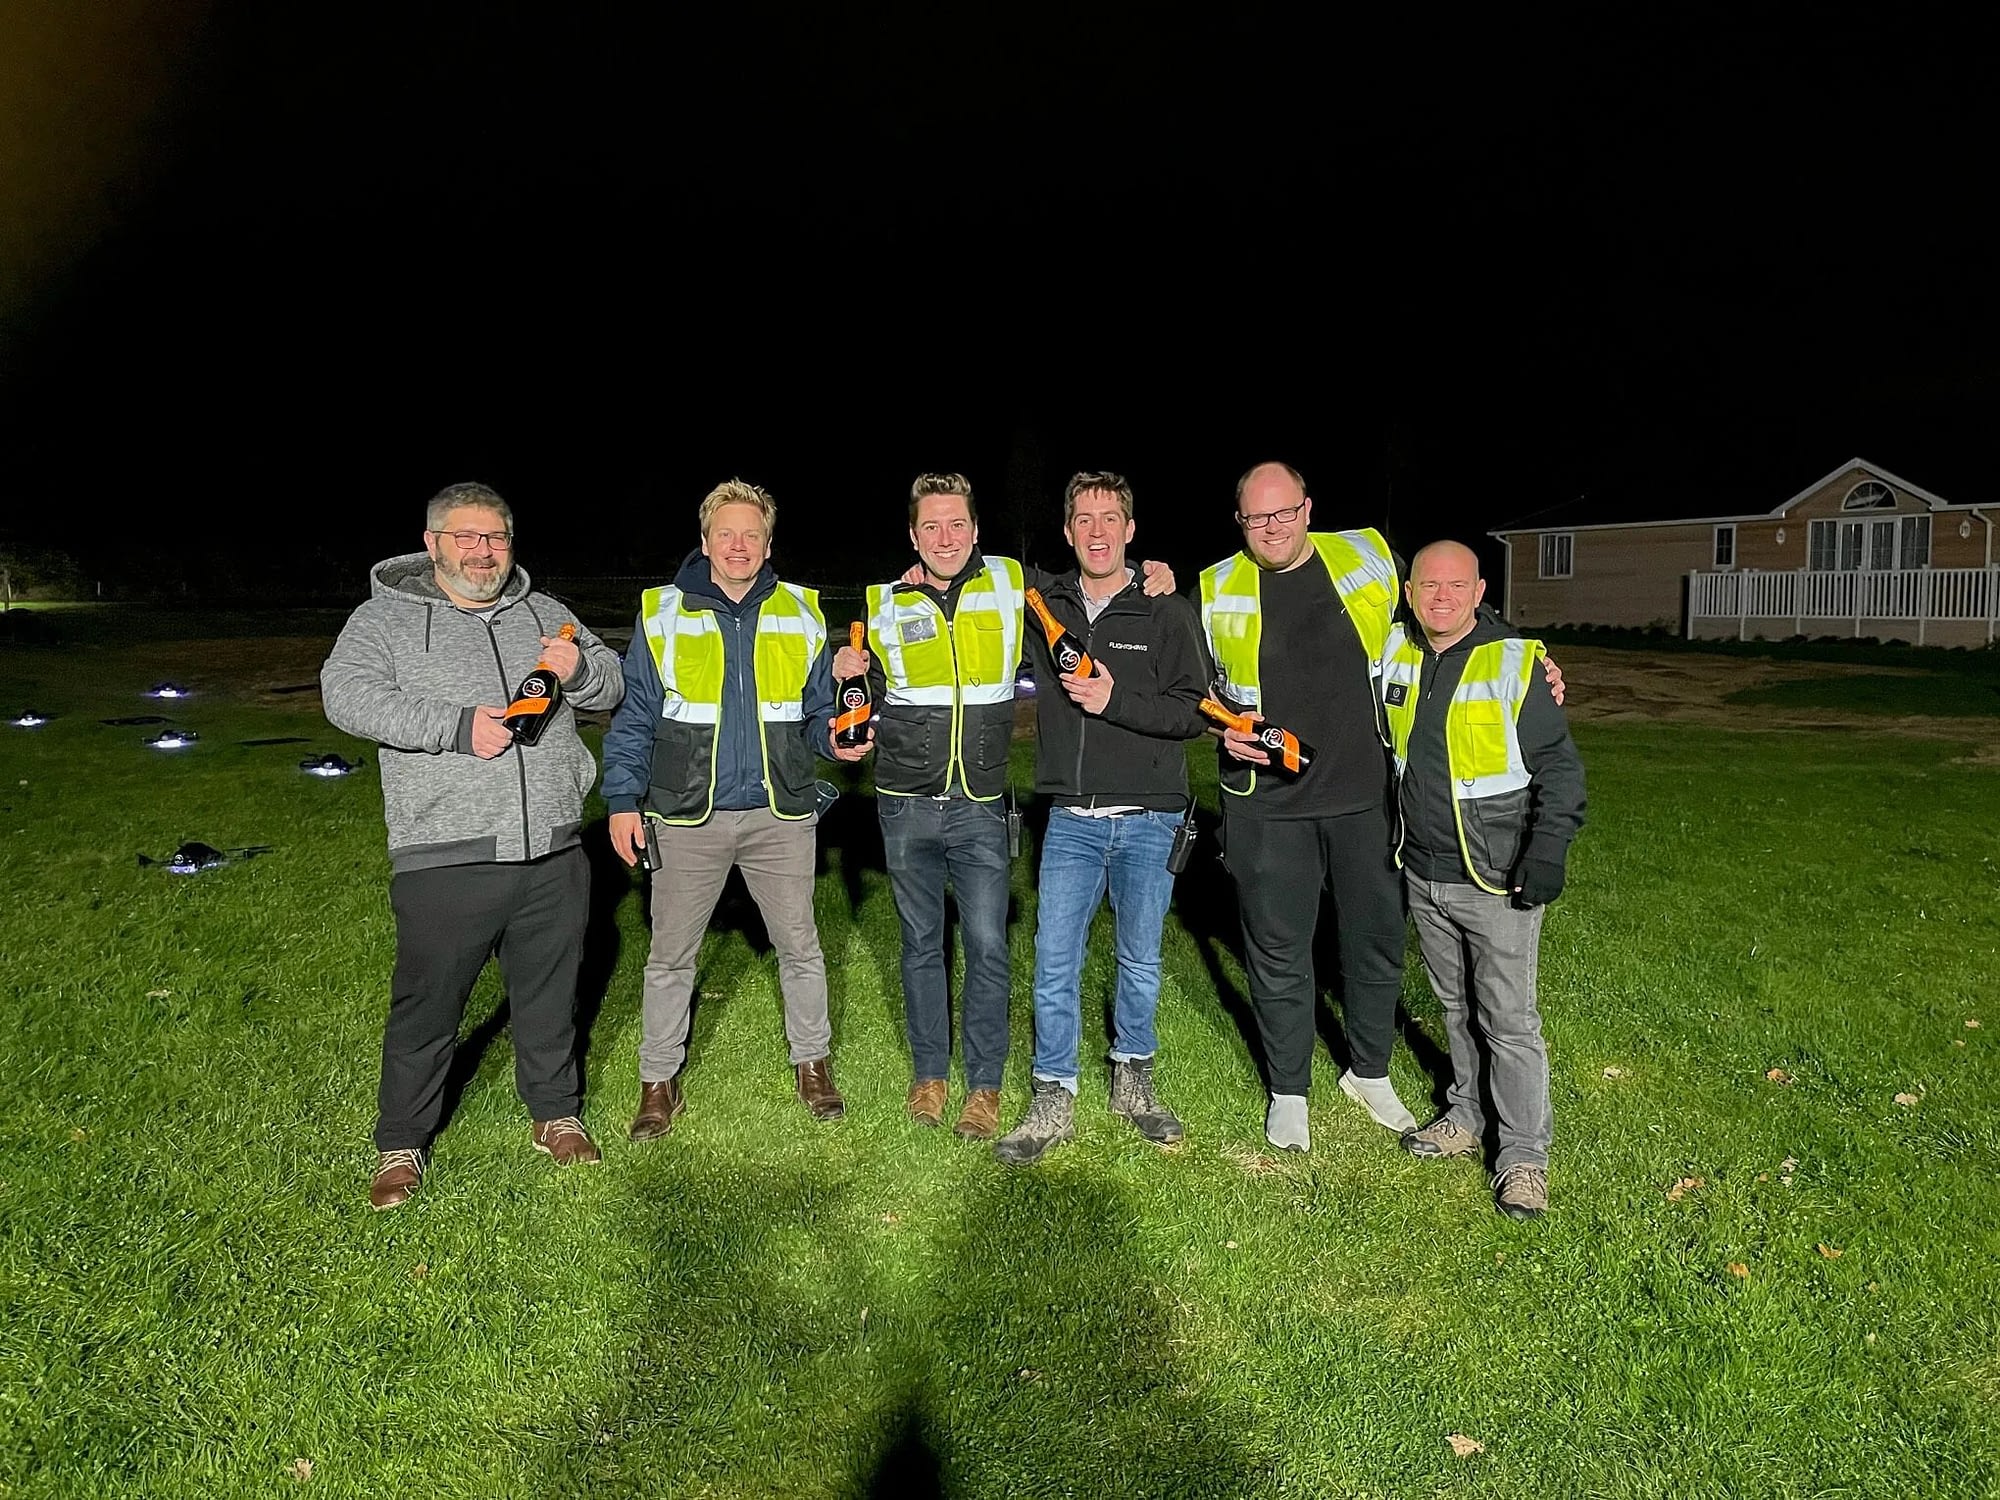 The FlightShows Crew after a successful drone show